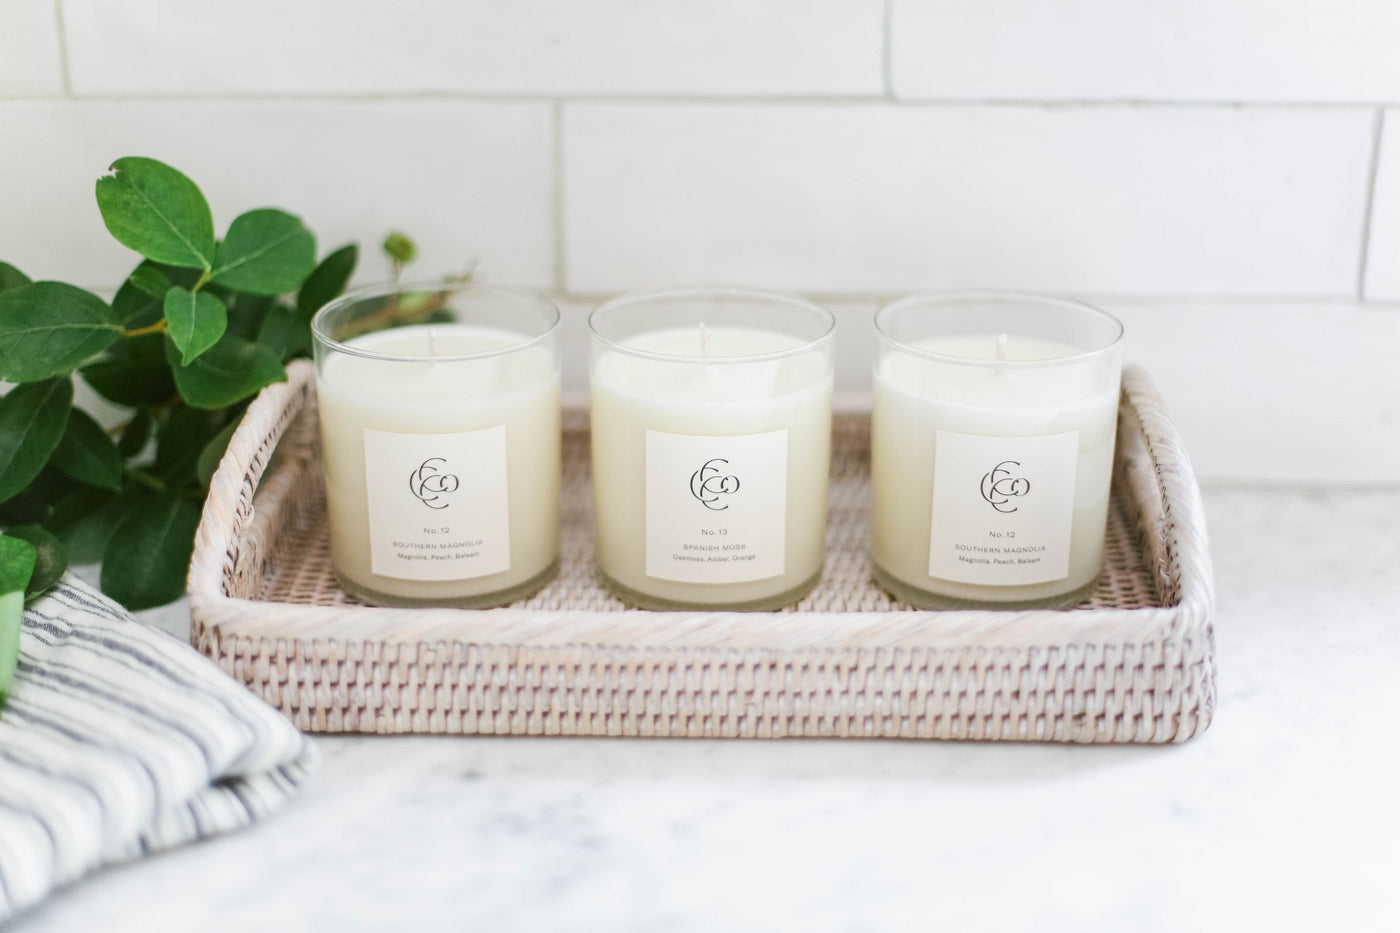 Southern Magnolia Candle